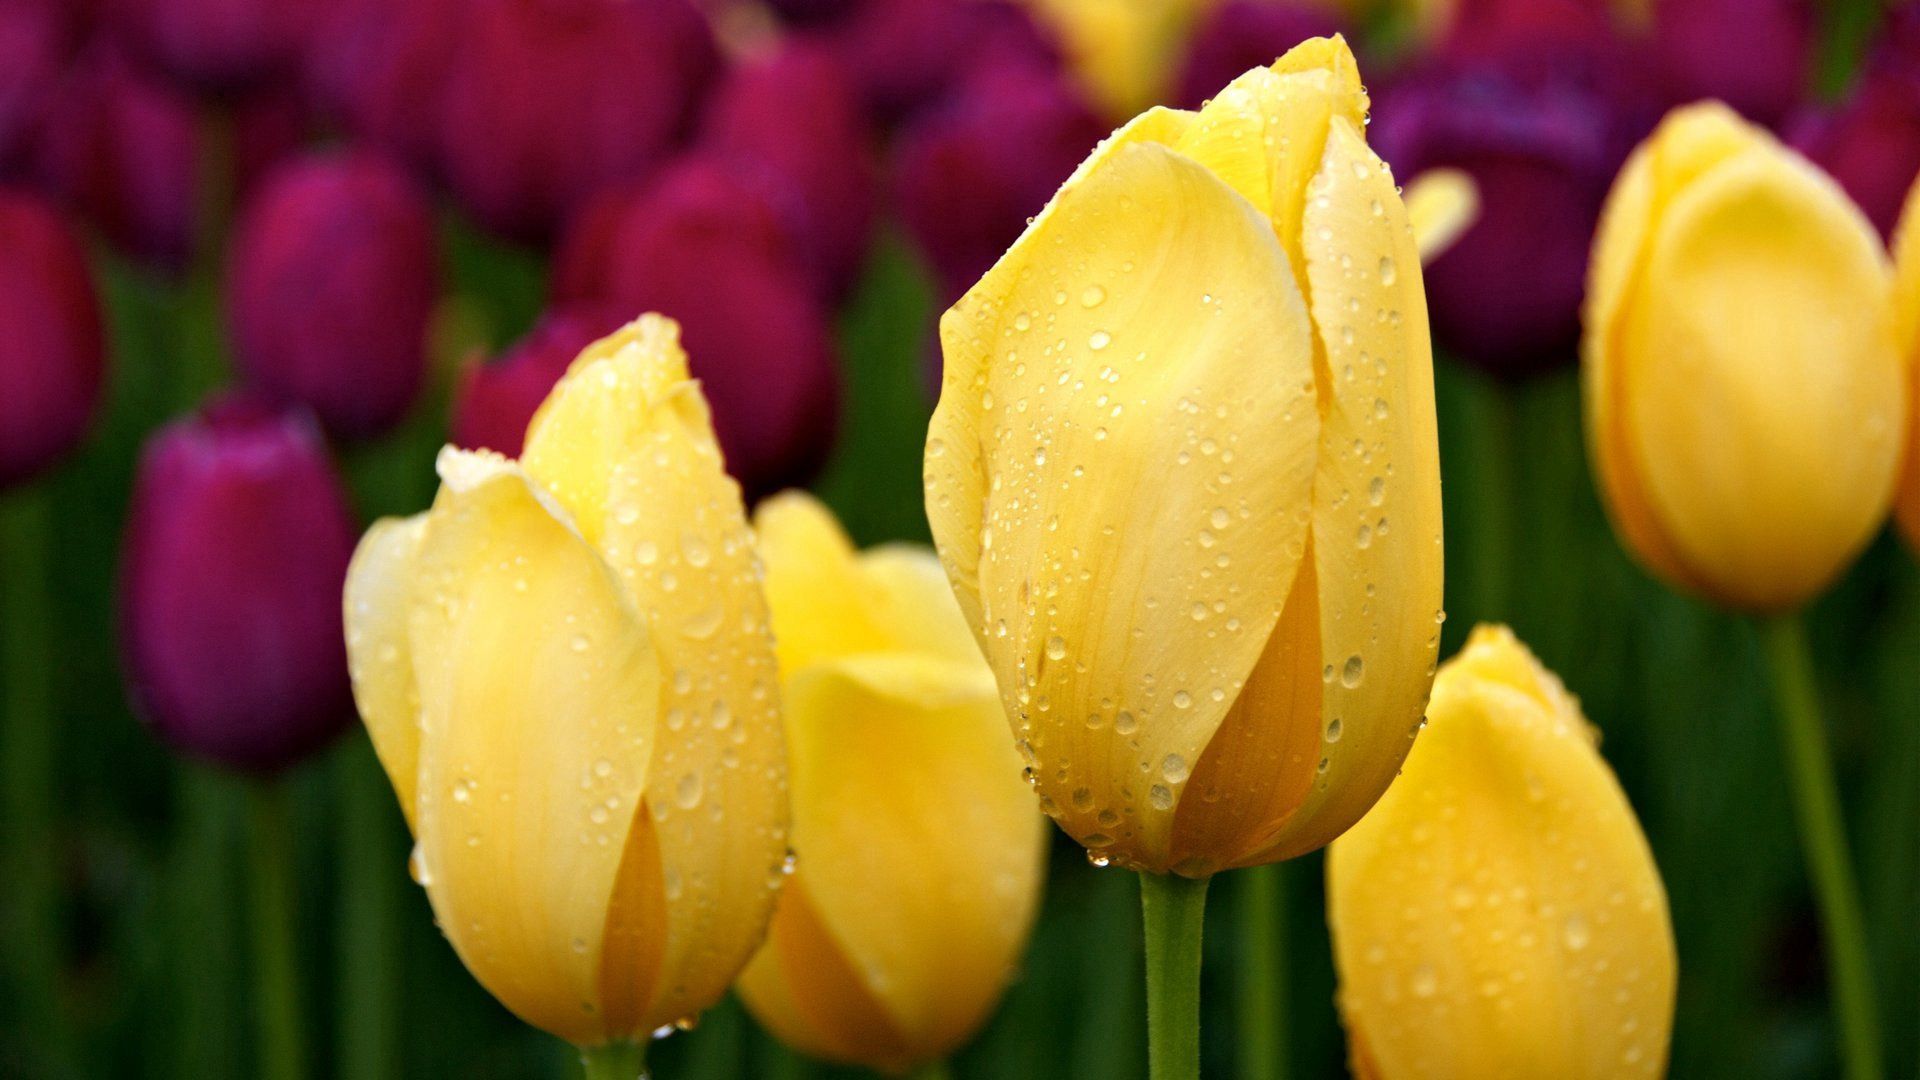 65996 download wallpaper tulips, flowers, drops, greens, buds, different screensavers and pictures for free